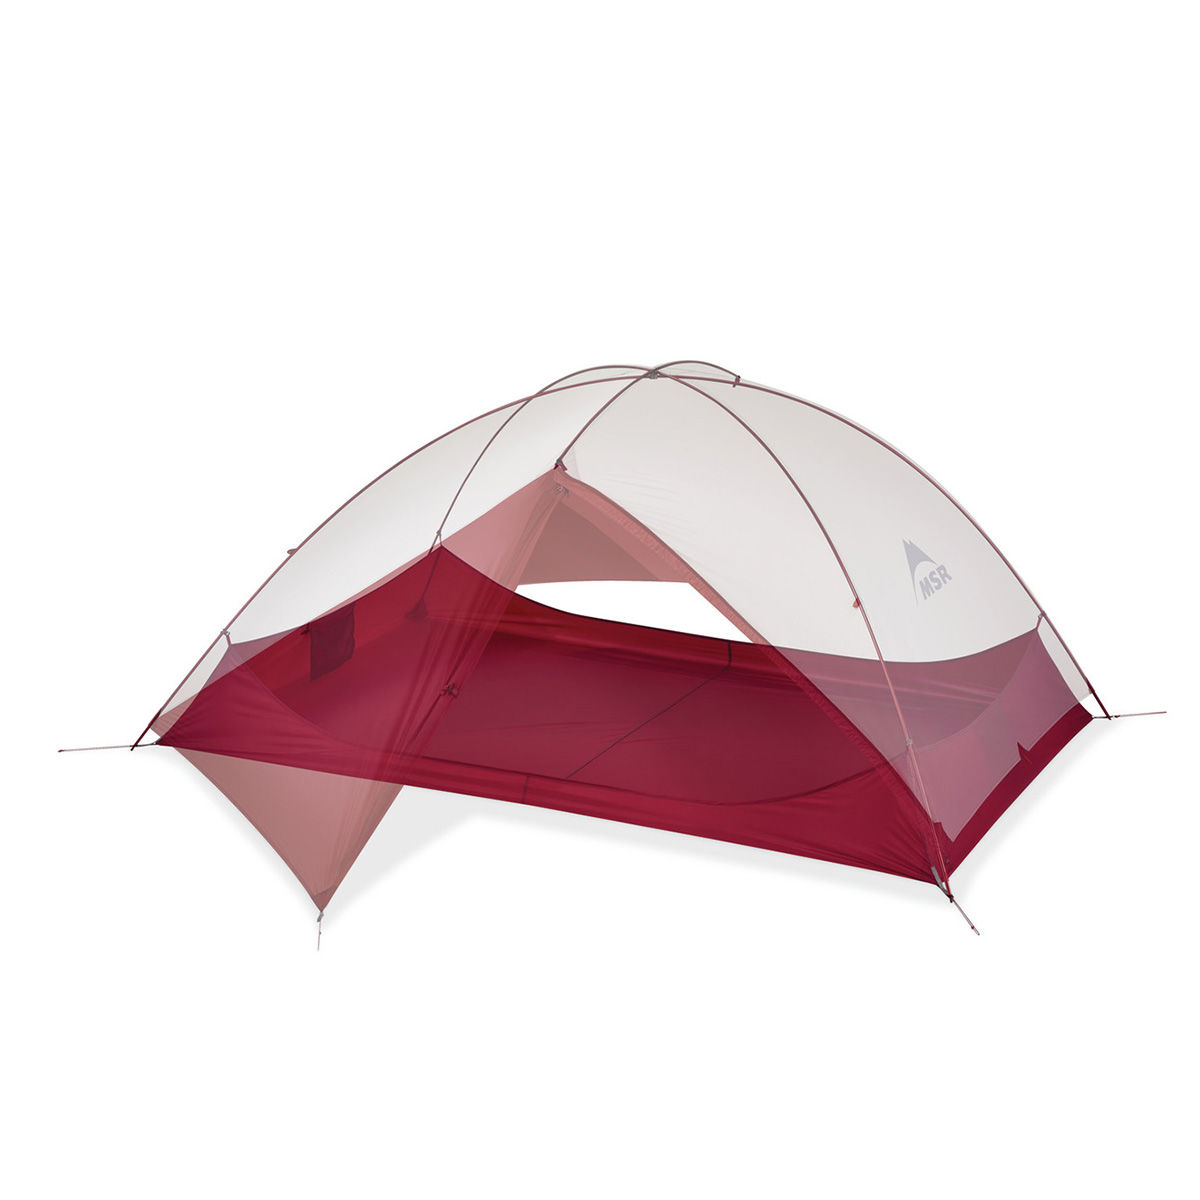 msr-zoic-2-backpacking-tent-2-peopl